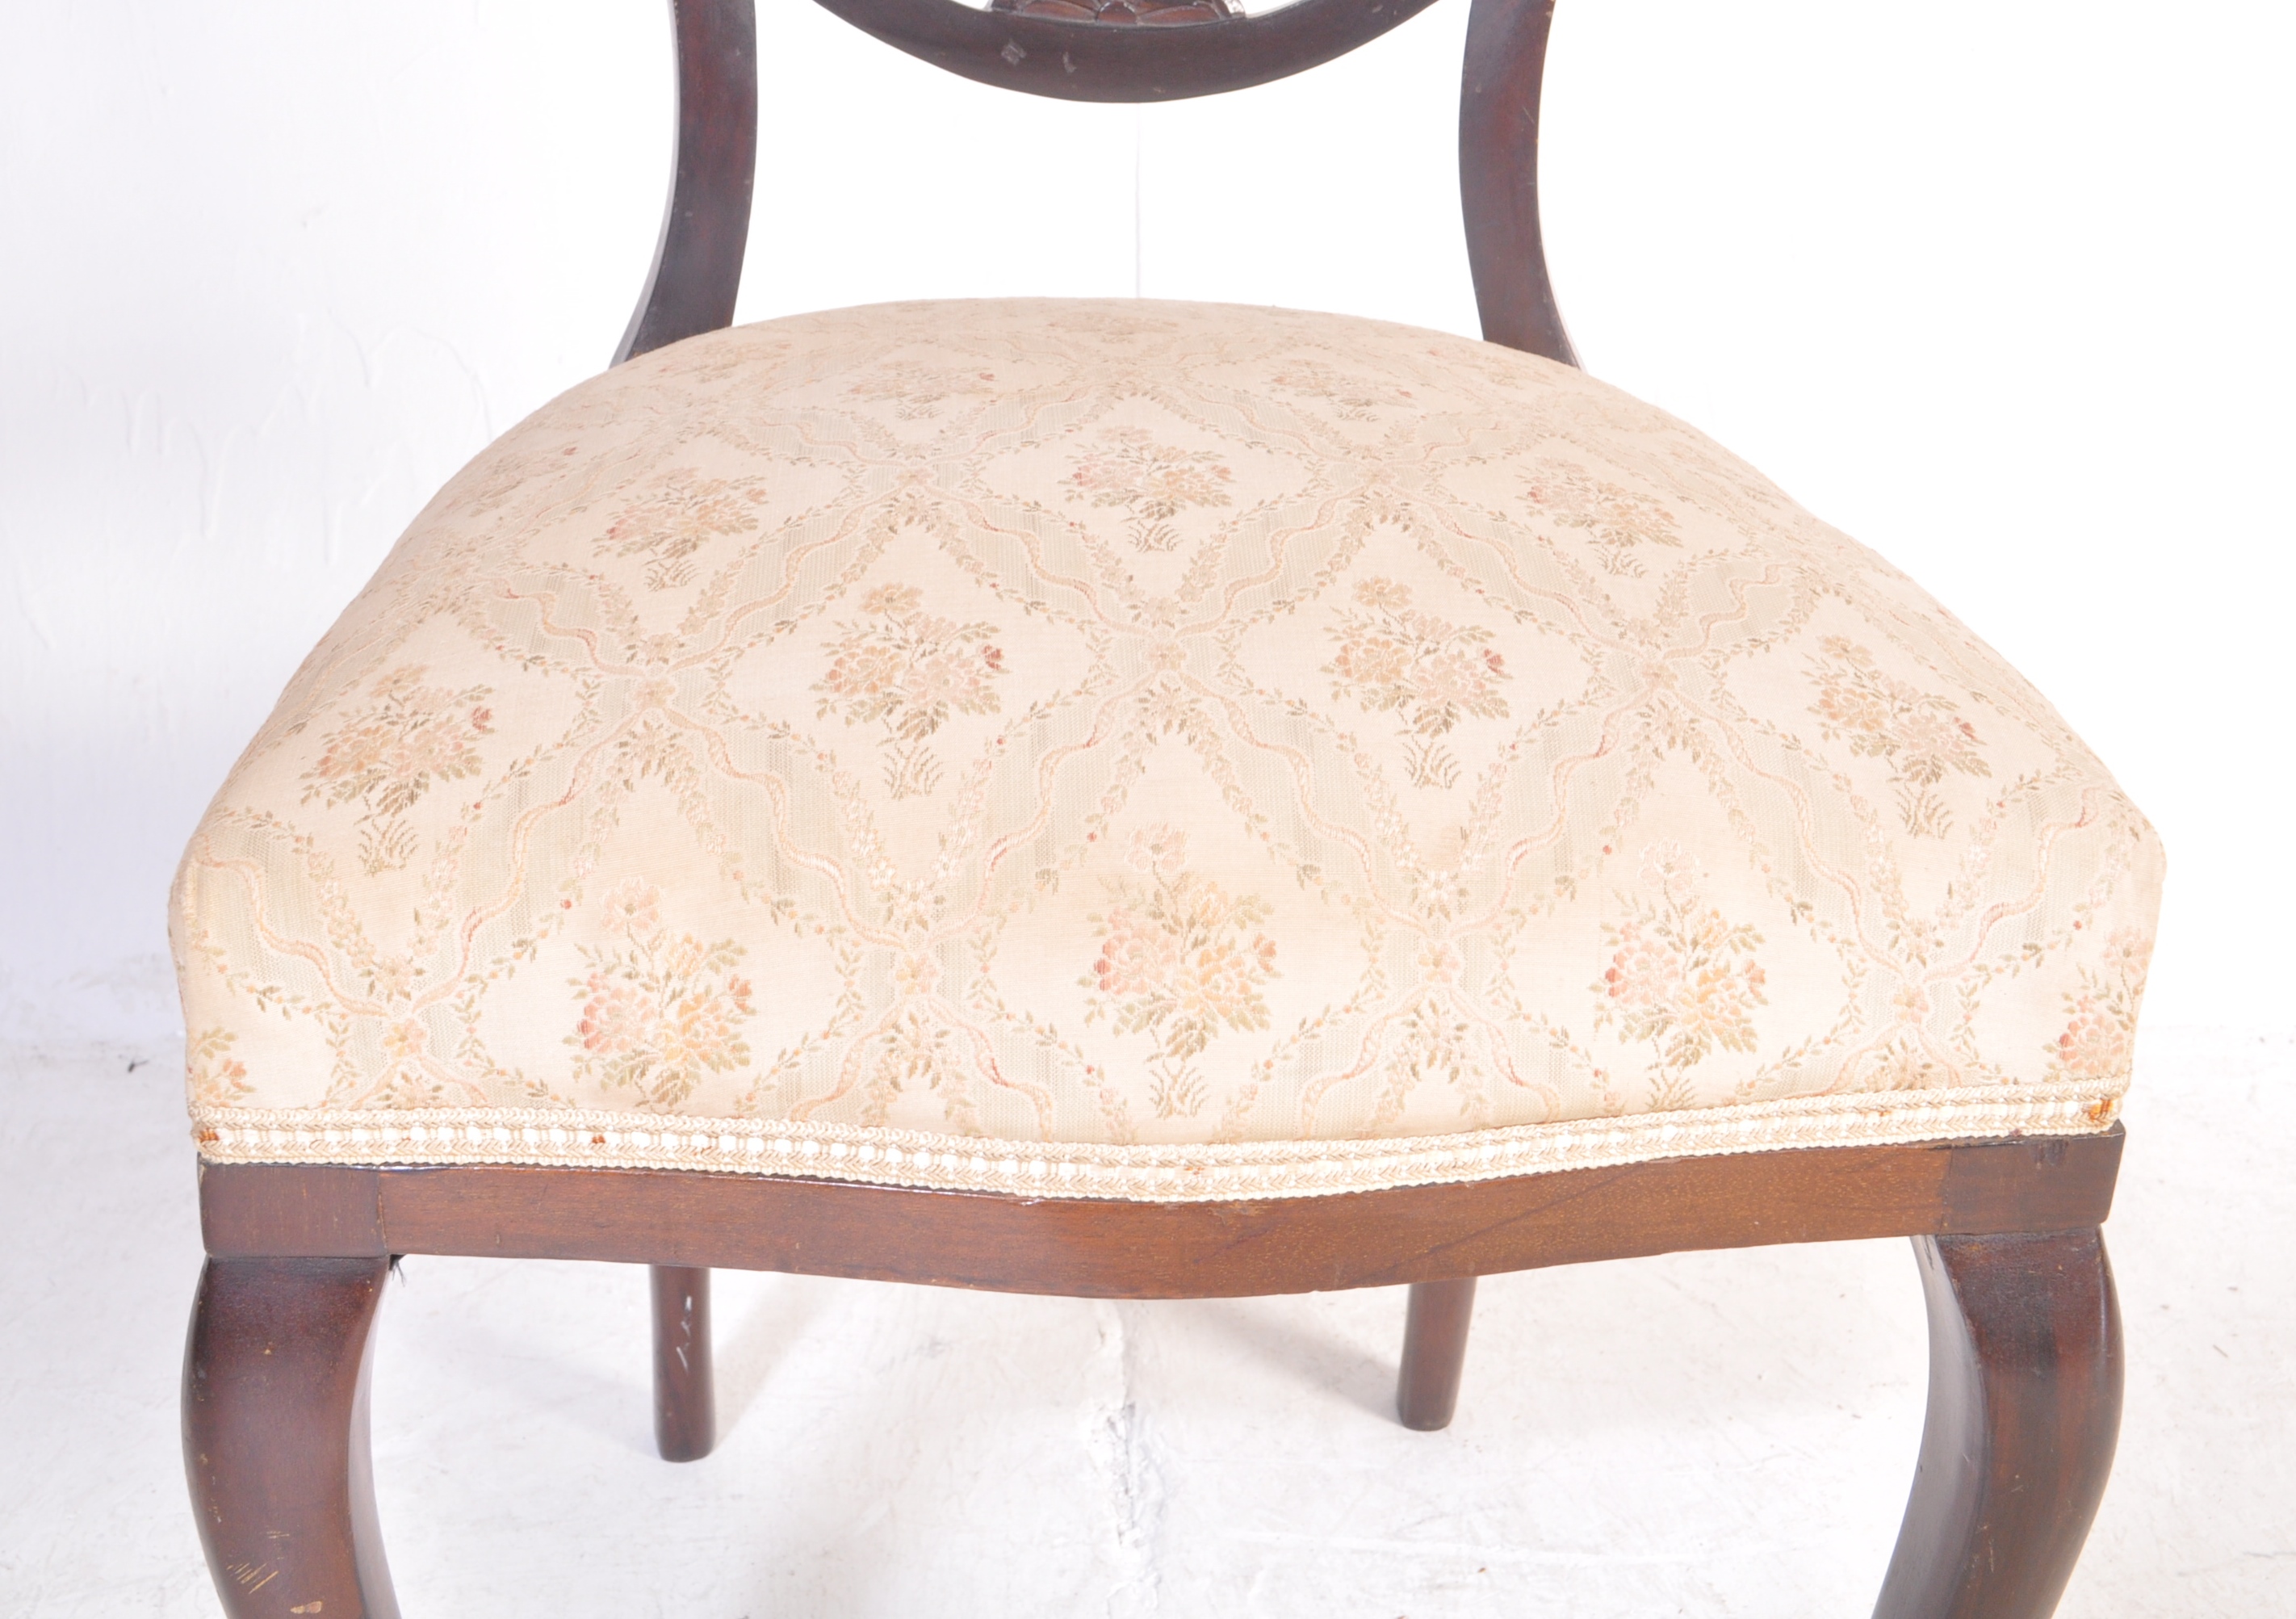 EDWARDIAN MAHOGANY INLAID UPHOLSTERED BEDROOM CHAIR - Image 4 of 5